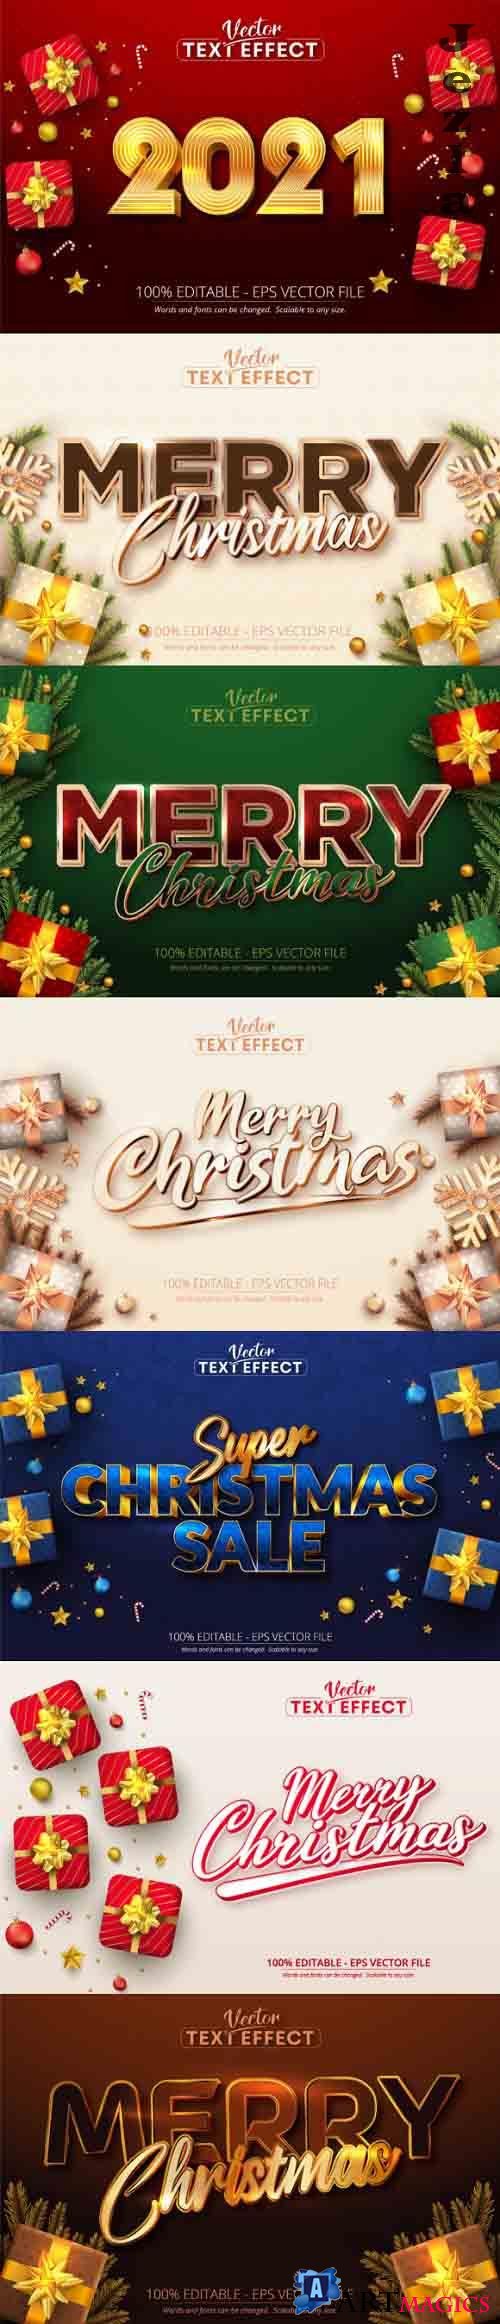 Editable font effect text collection illustration design 237 - Merry Christmas